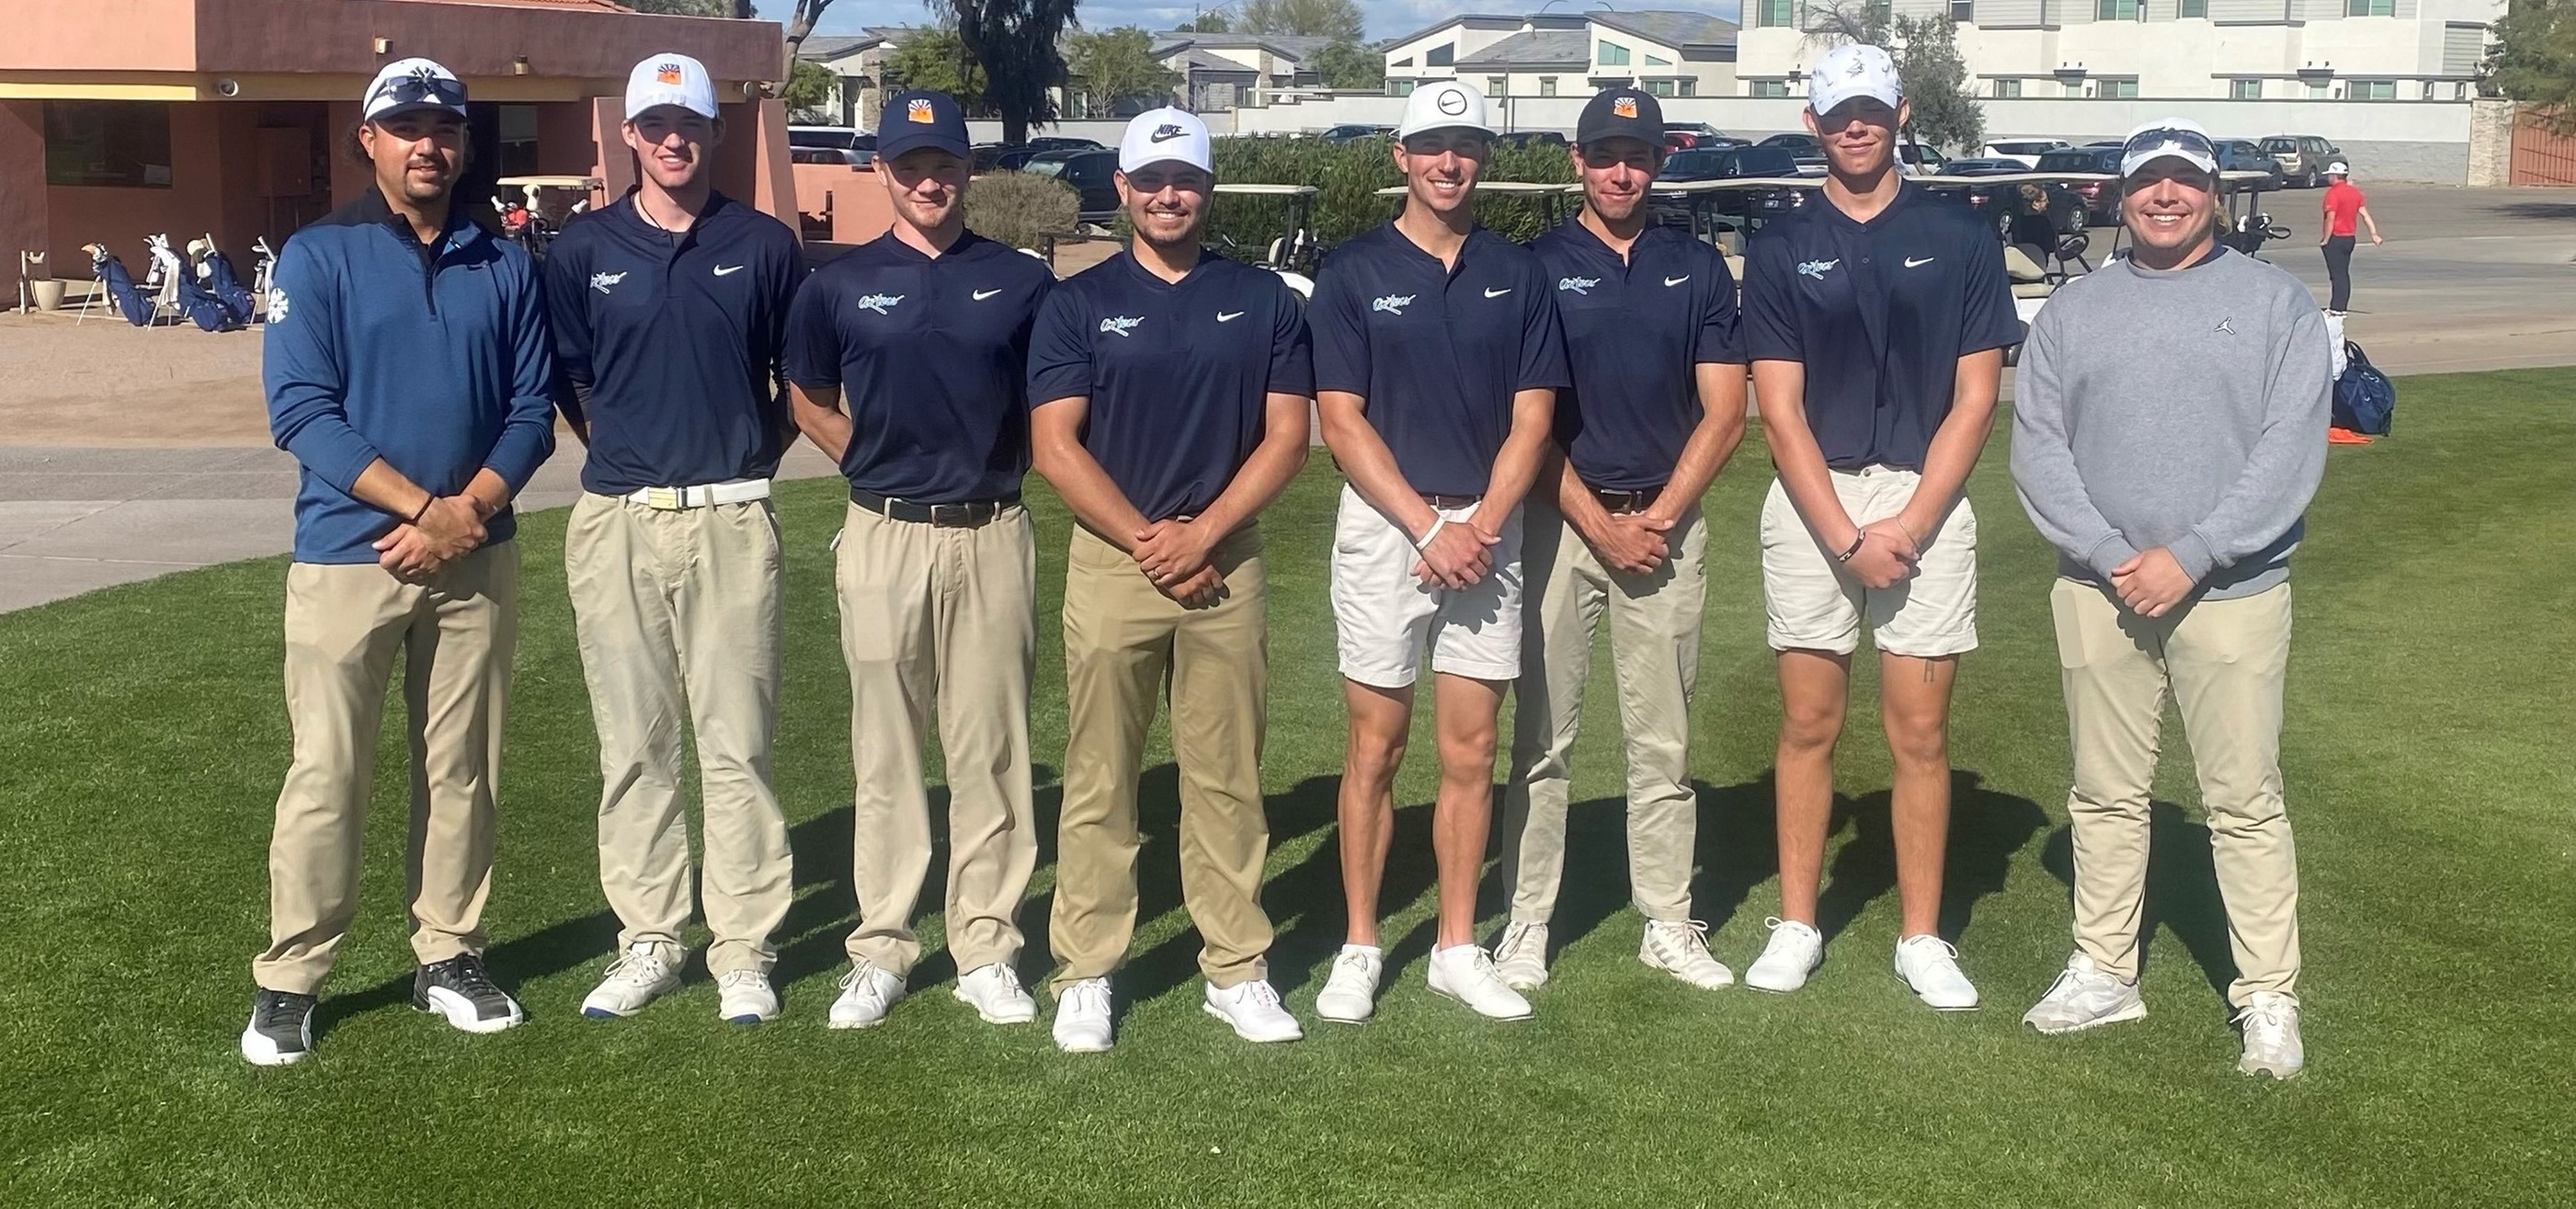 The Aztecs Men's Golf team tied for second place at the Chandler-Gilbert Invitational to open the 2023 season. Sophomore Daniel Henely (Cienega HS) tied for first place with an overall score of 134 (68-66). (Left to Right): Assistant Coach Landyn Lewis, Tommy Rosenvall, Herman Holst, RJ Wright, Jay Shero, Daniel Henely, Max Krueger and Head Coach Marcus Smith. Photo courtesy of Marcus Smith